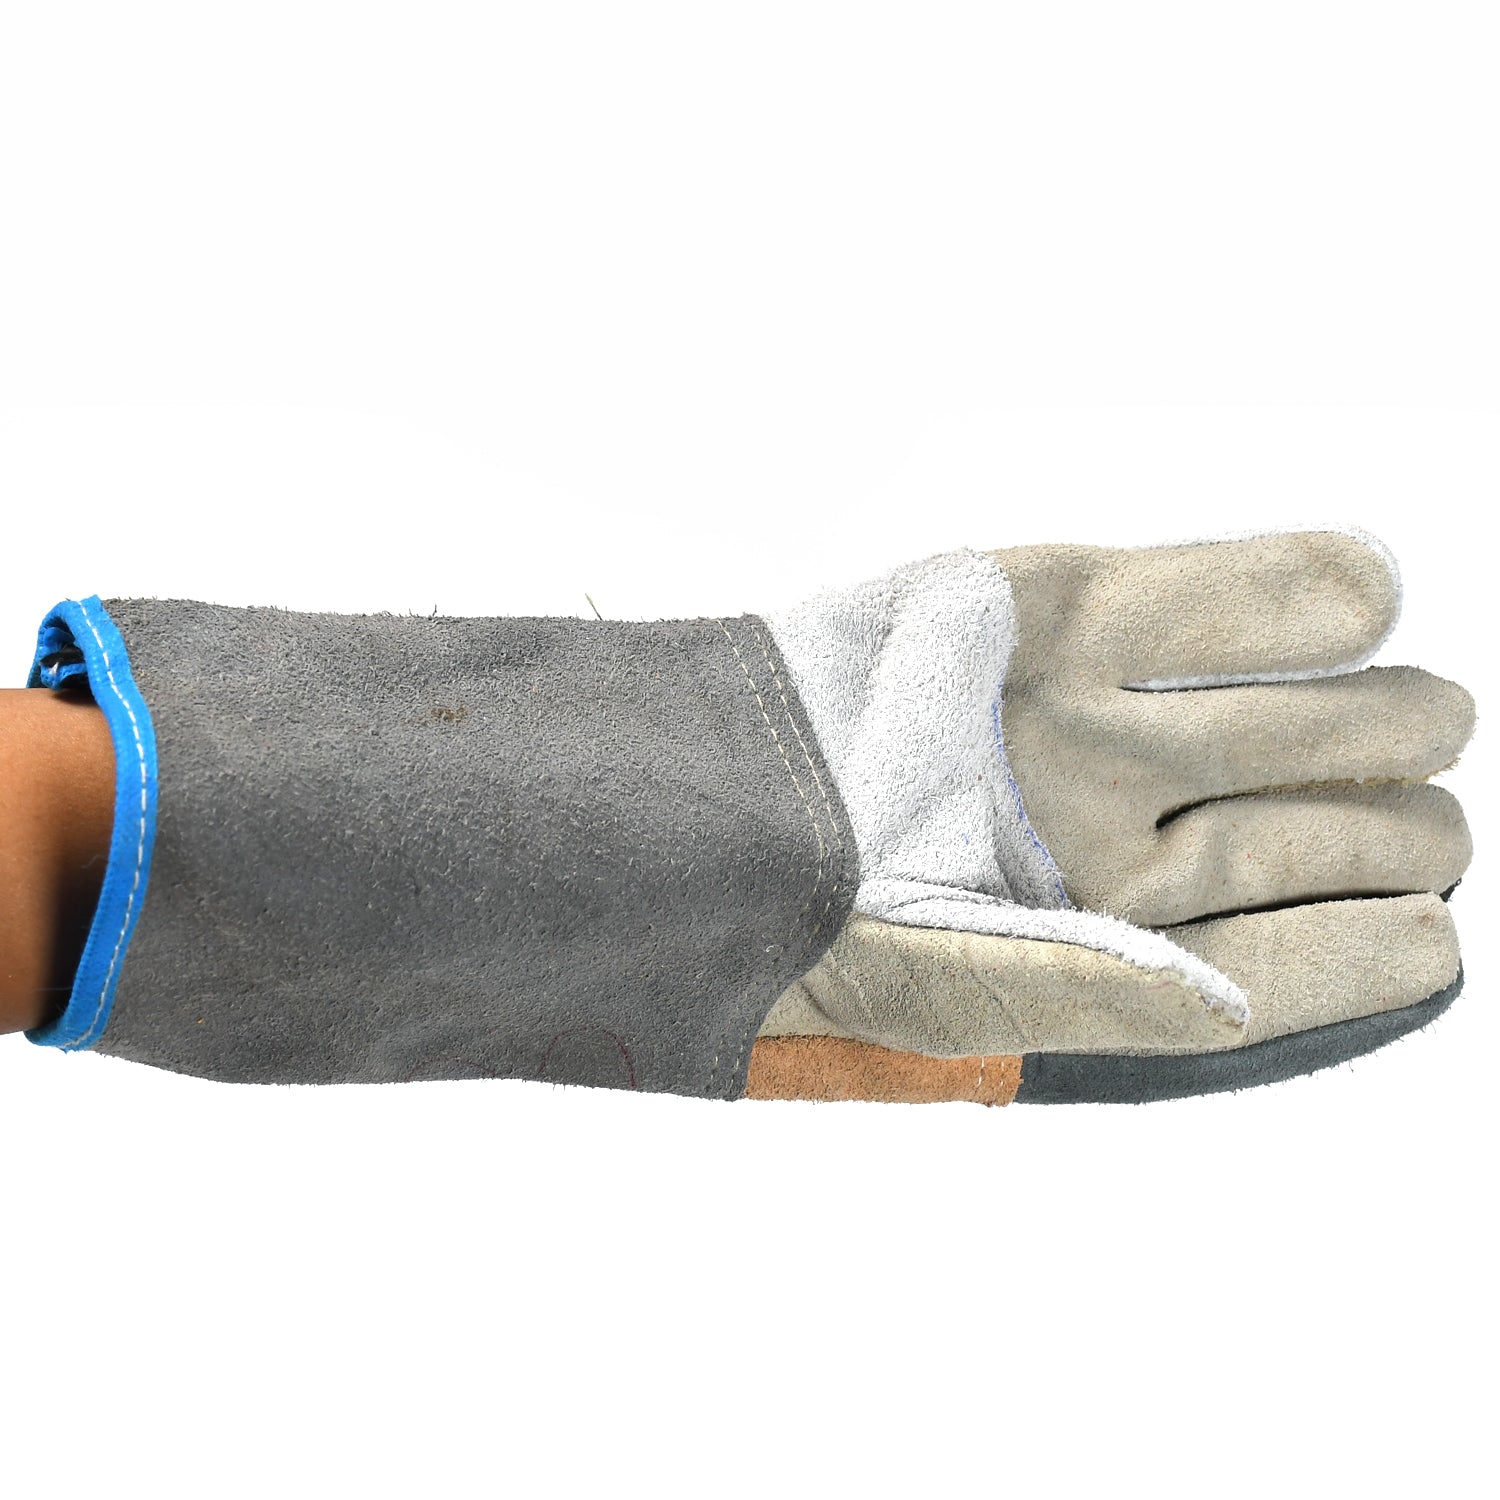 0716A Industrial Heavy Duty Welding Leather Glove With Inner Lining, Heat And Abrasion Resistance Glove DeoDap